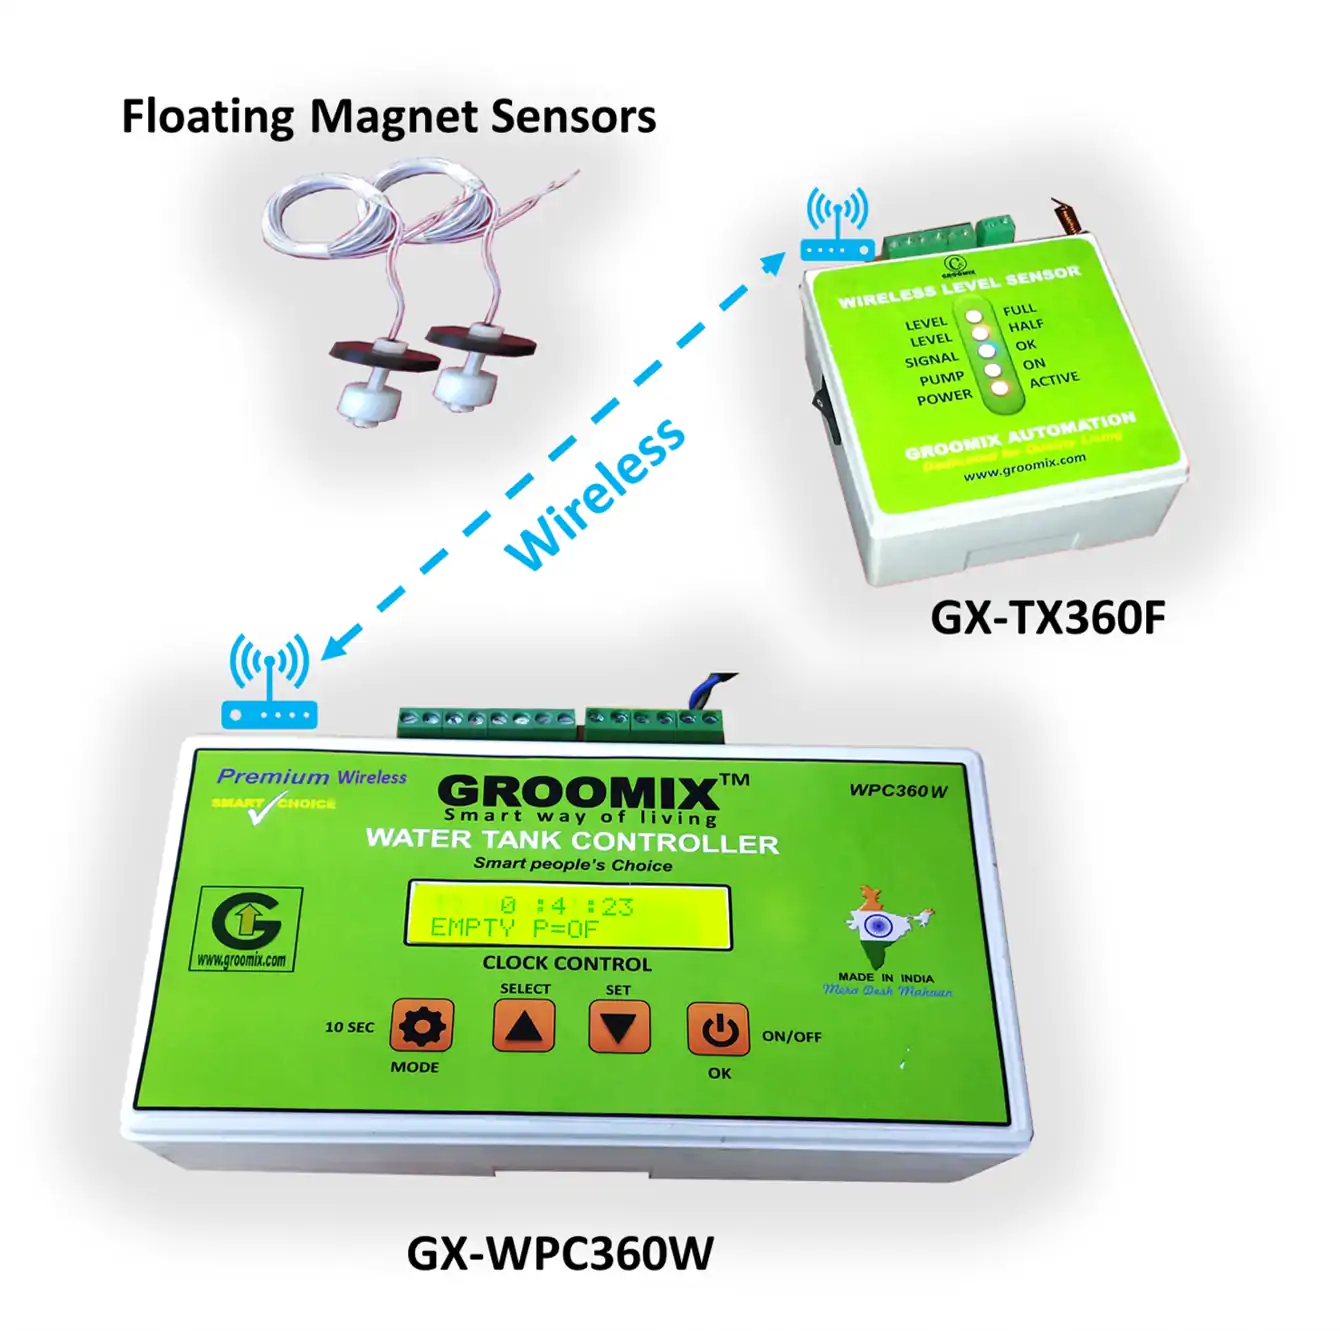 image of Premium Wireless water pump controller and wireless floating magnet level sensor transmitter